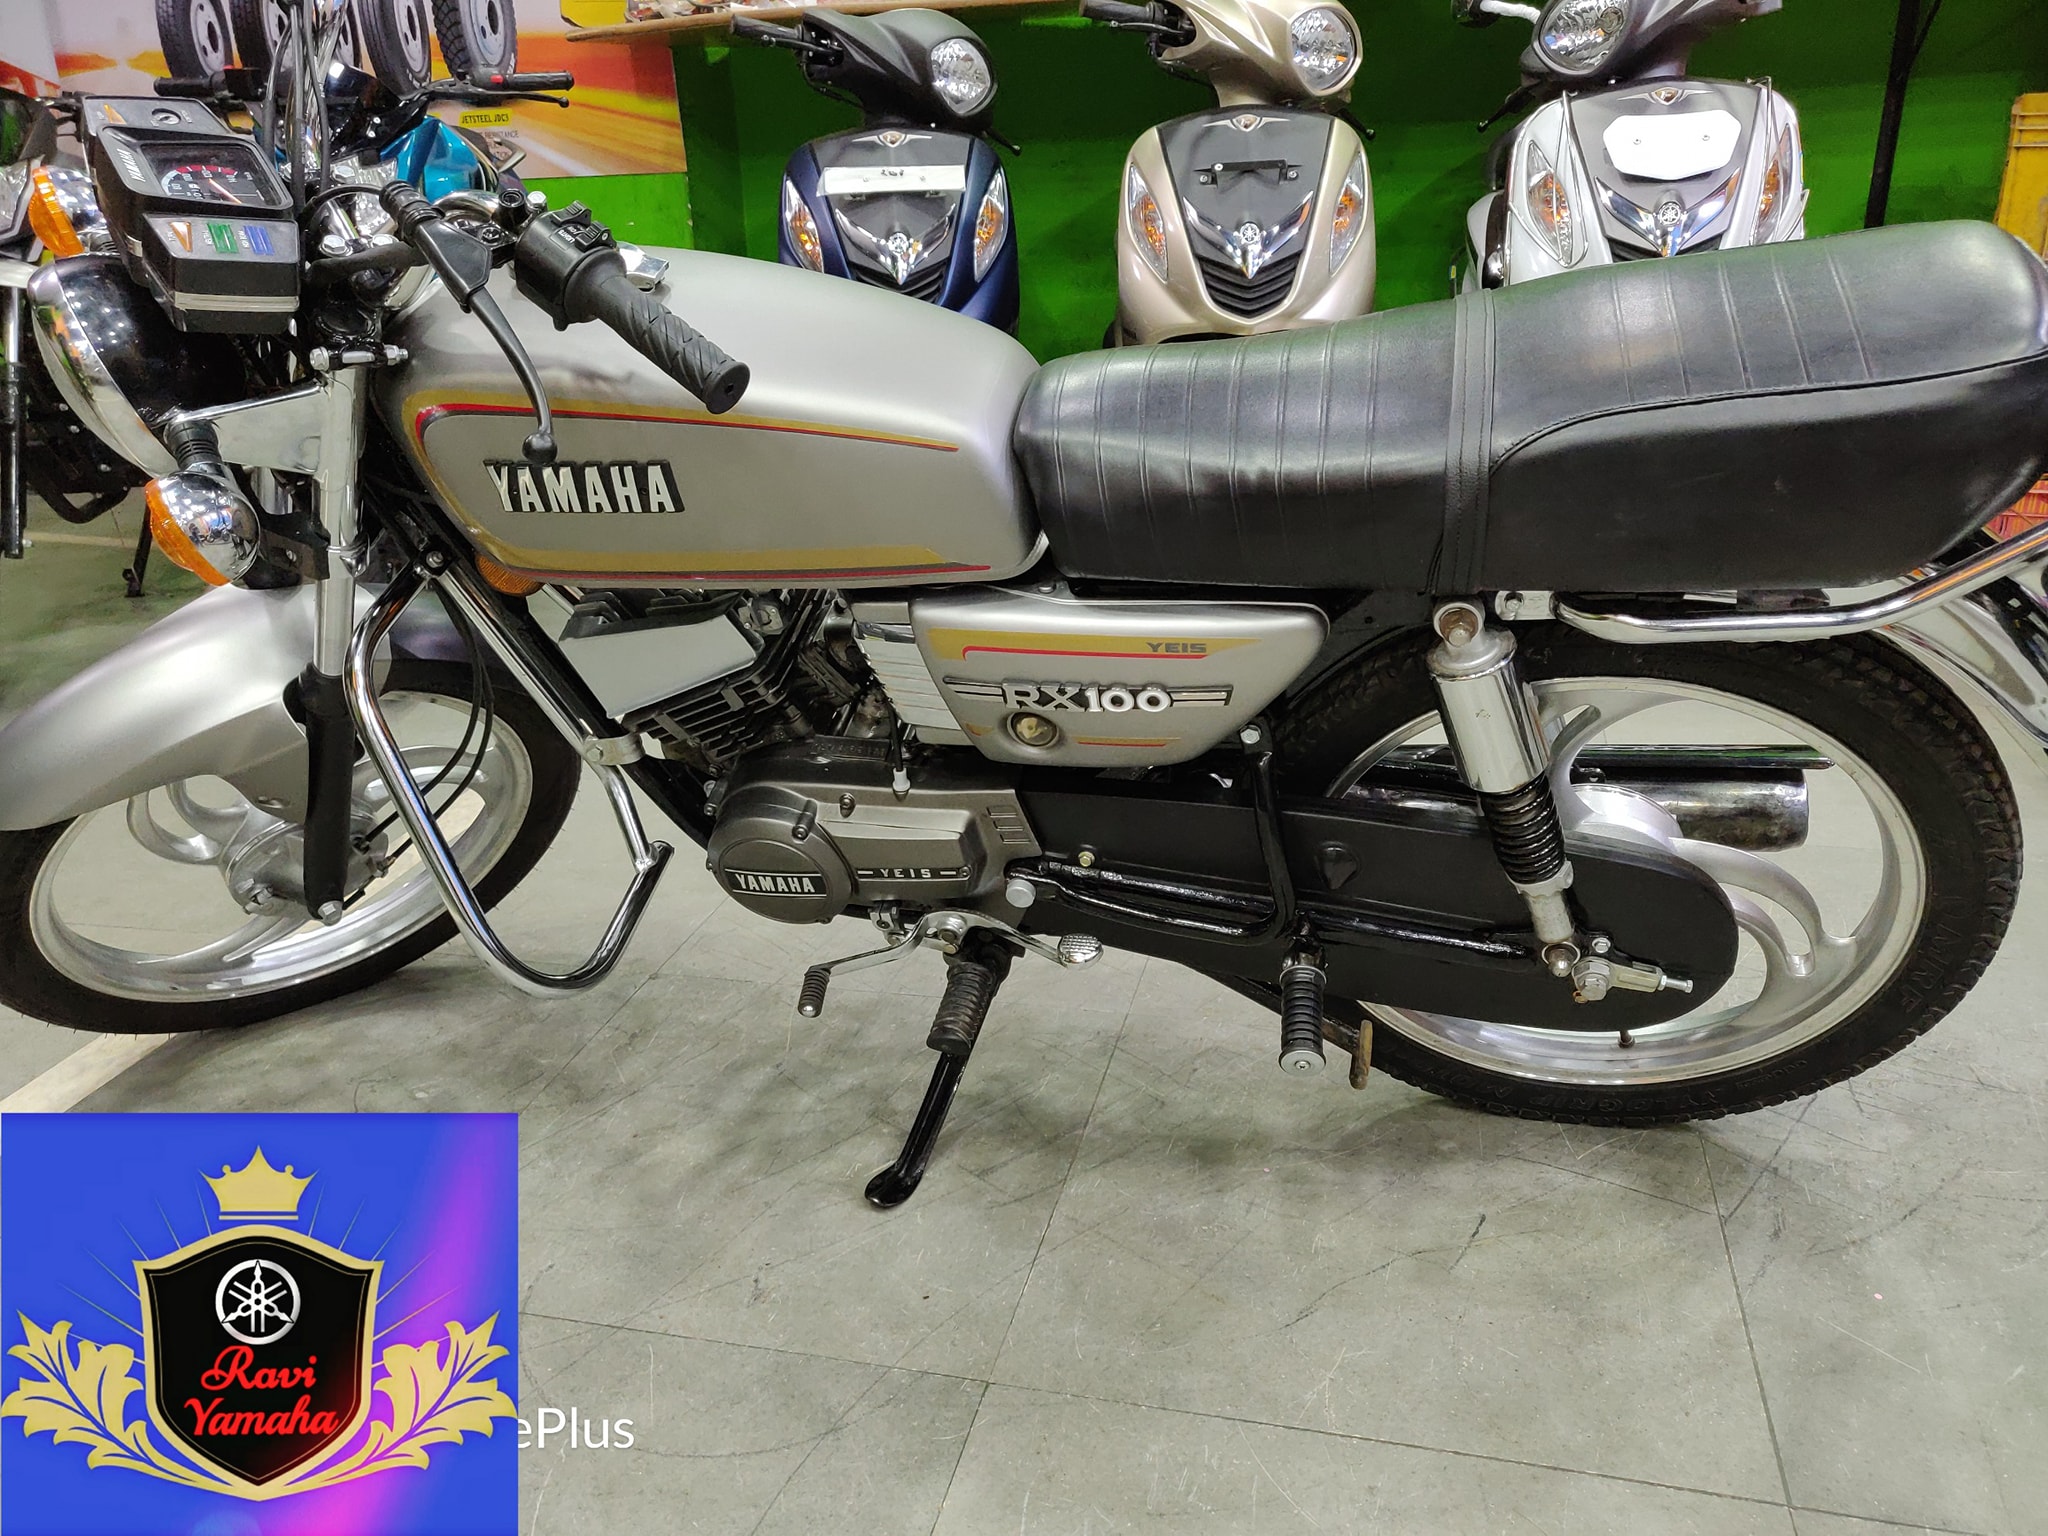 Top 10 Modified Yamaha RX100 Models in India - Must Check! - angle